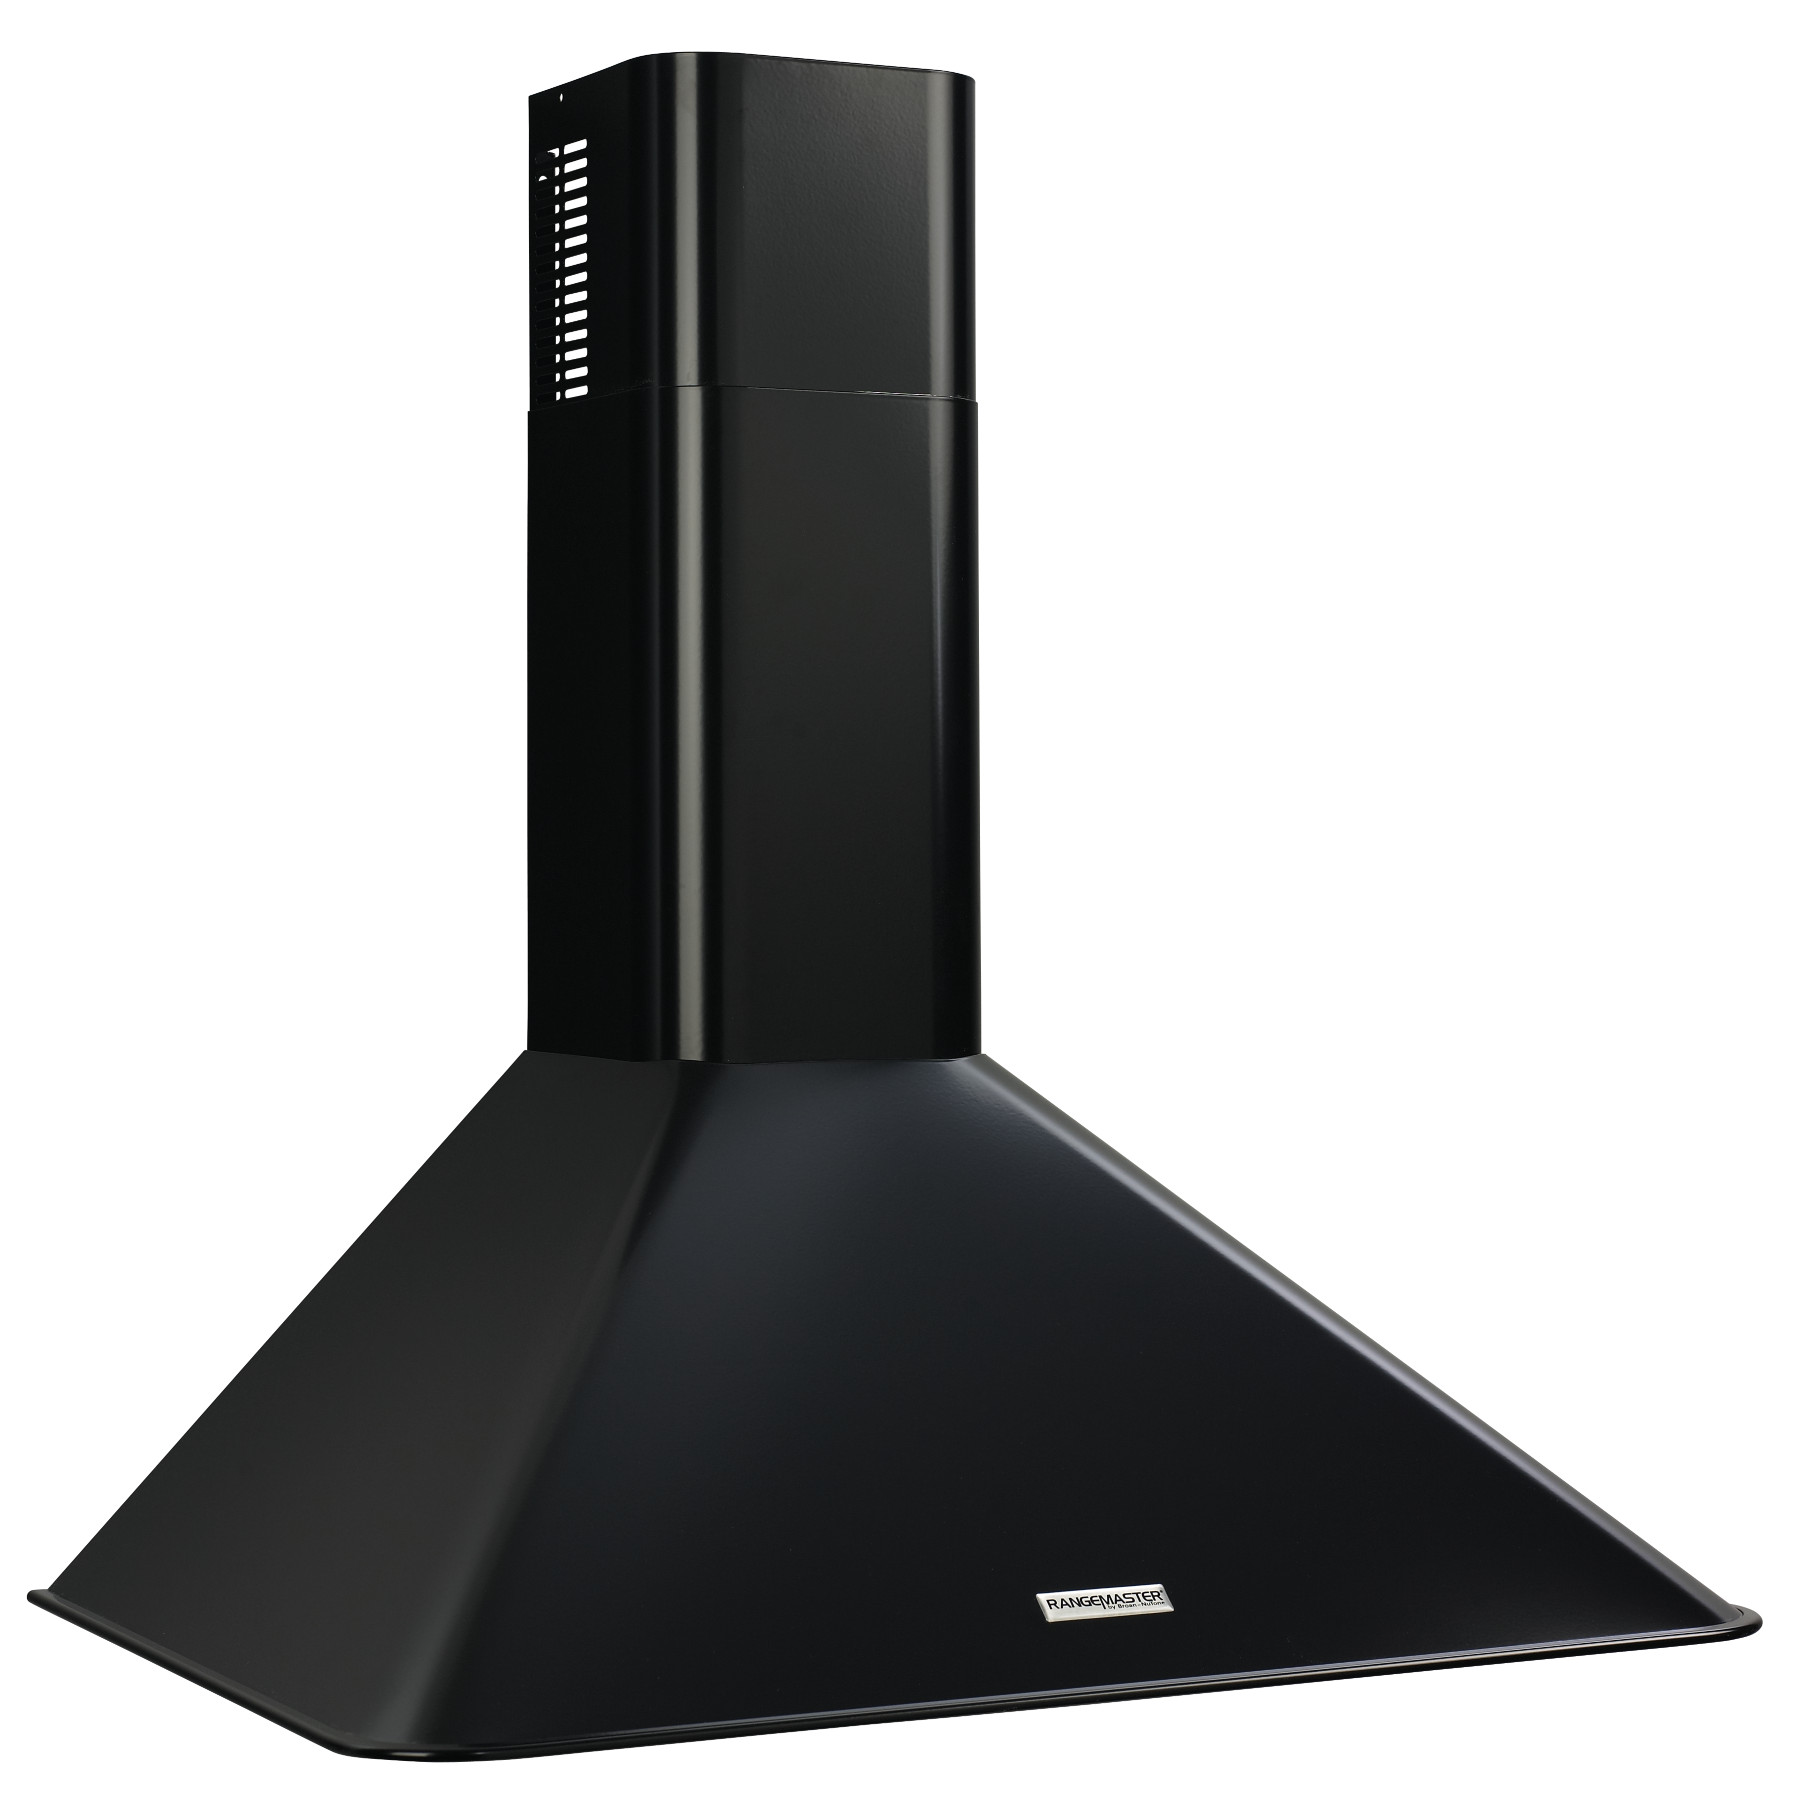 DISCONTINUED: Broan® 290 CFM, 30-Inch Wall-Mounted Chimney Hood in Black